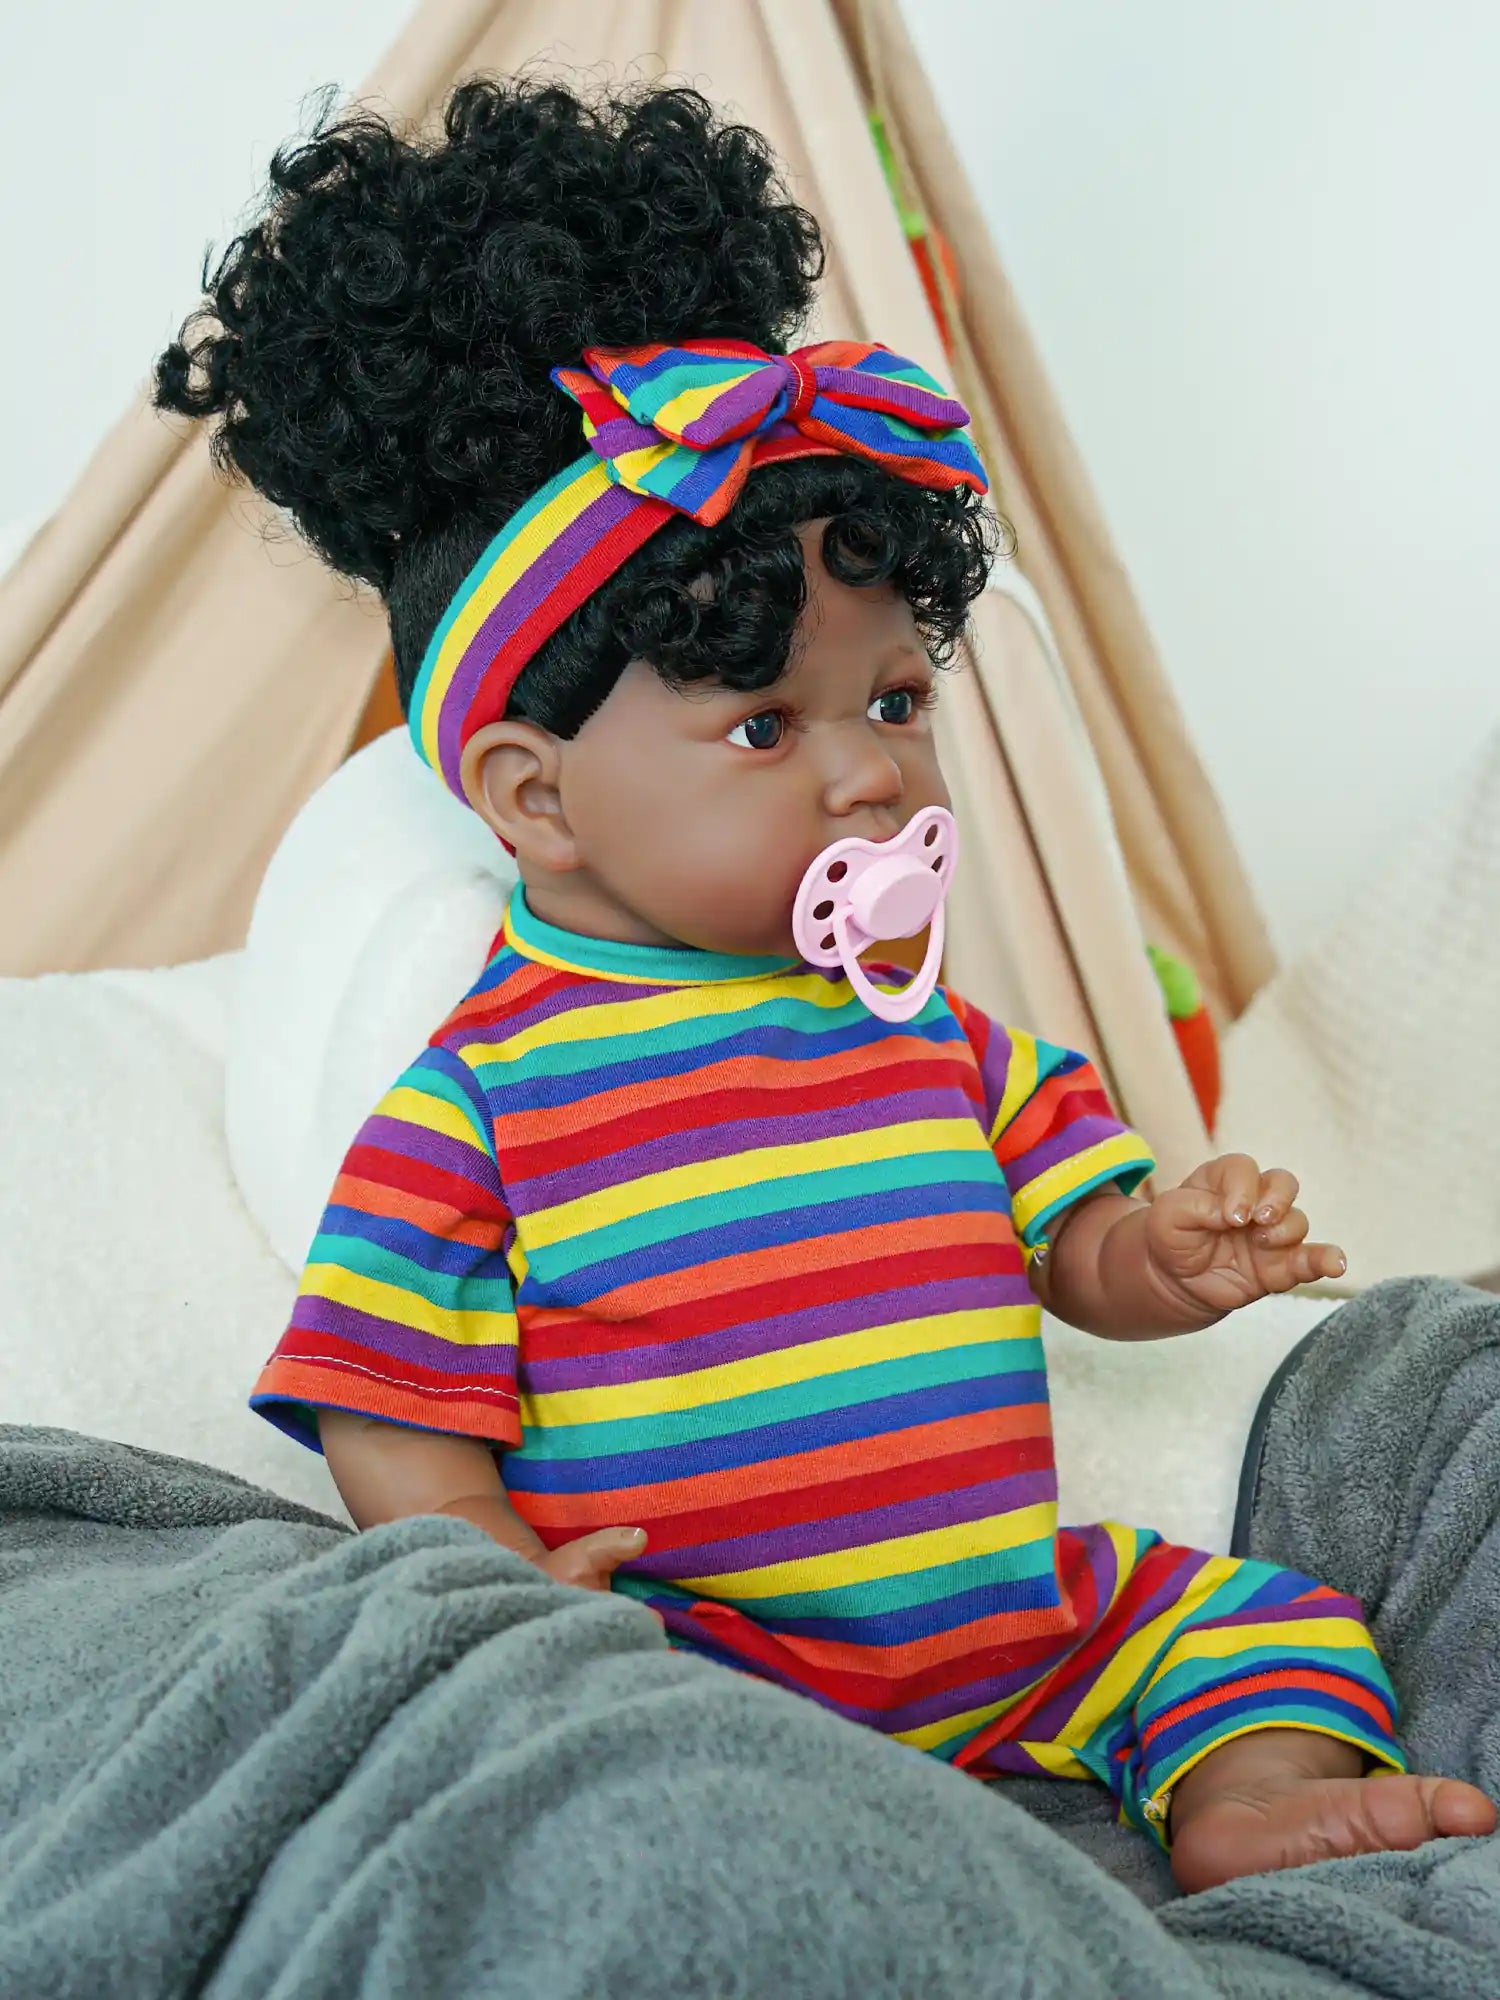 A black reborn baby doll sitting on a sofa wearing multi-colored striped clothes and having a magnetic pacifier in its mouth